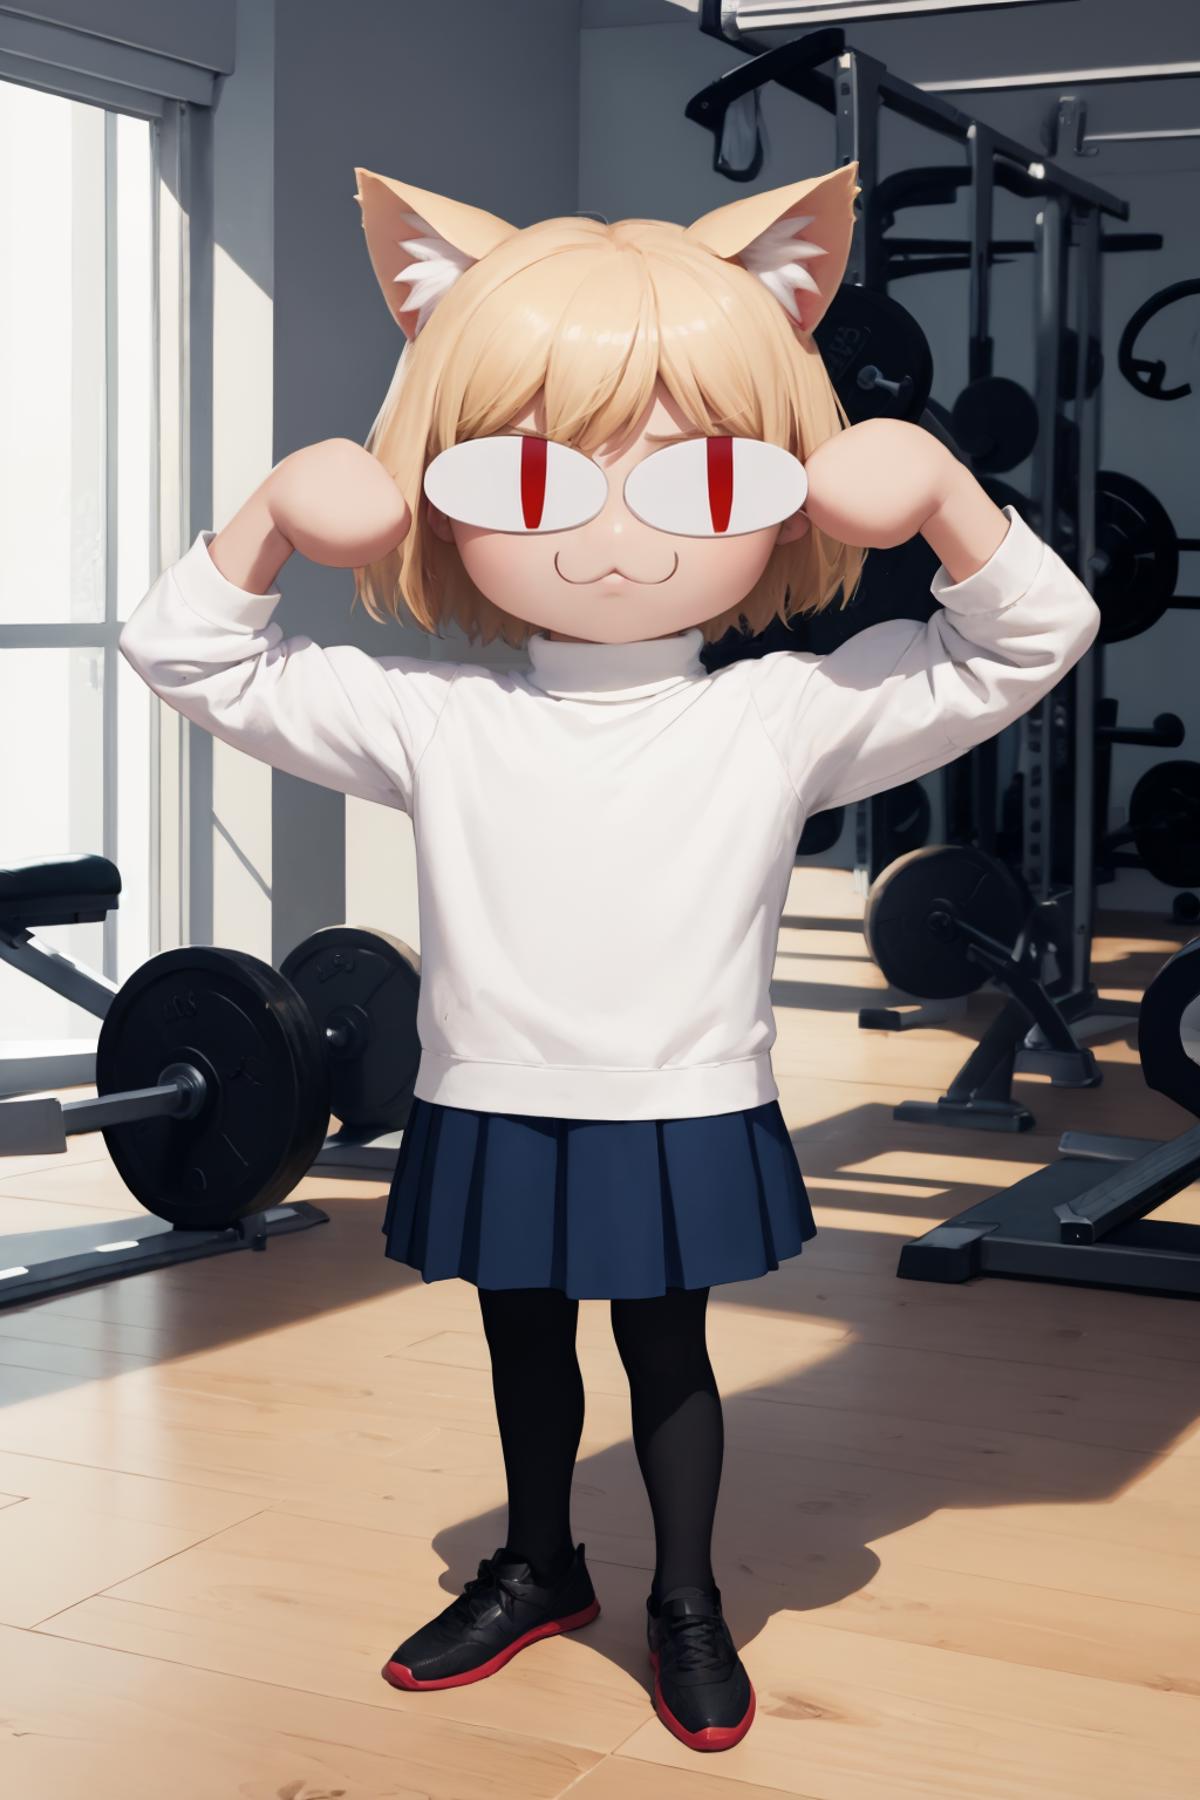 A cartoon image of a girl wearing a white shirt and blue skirt, posing with weights.